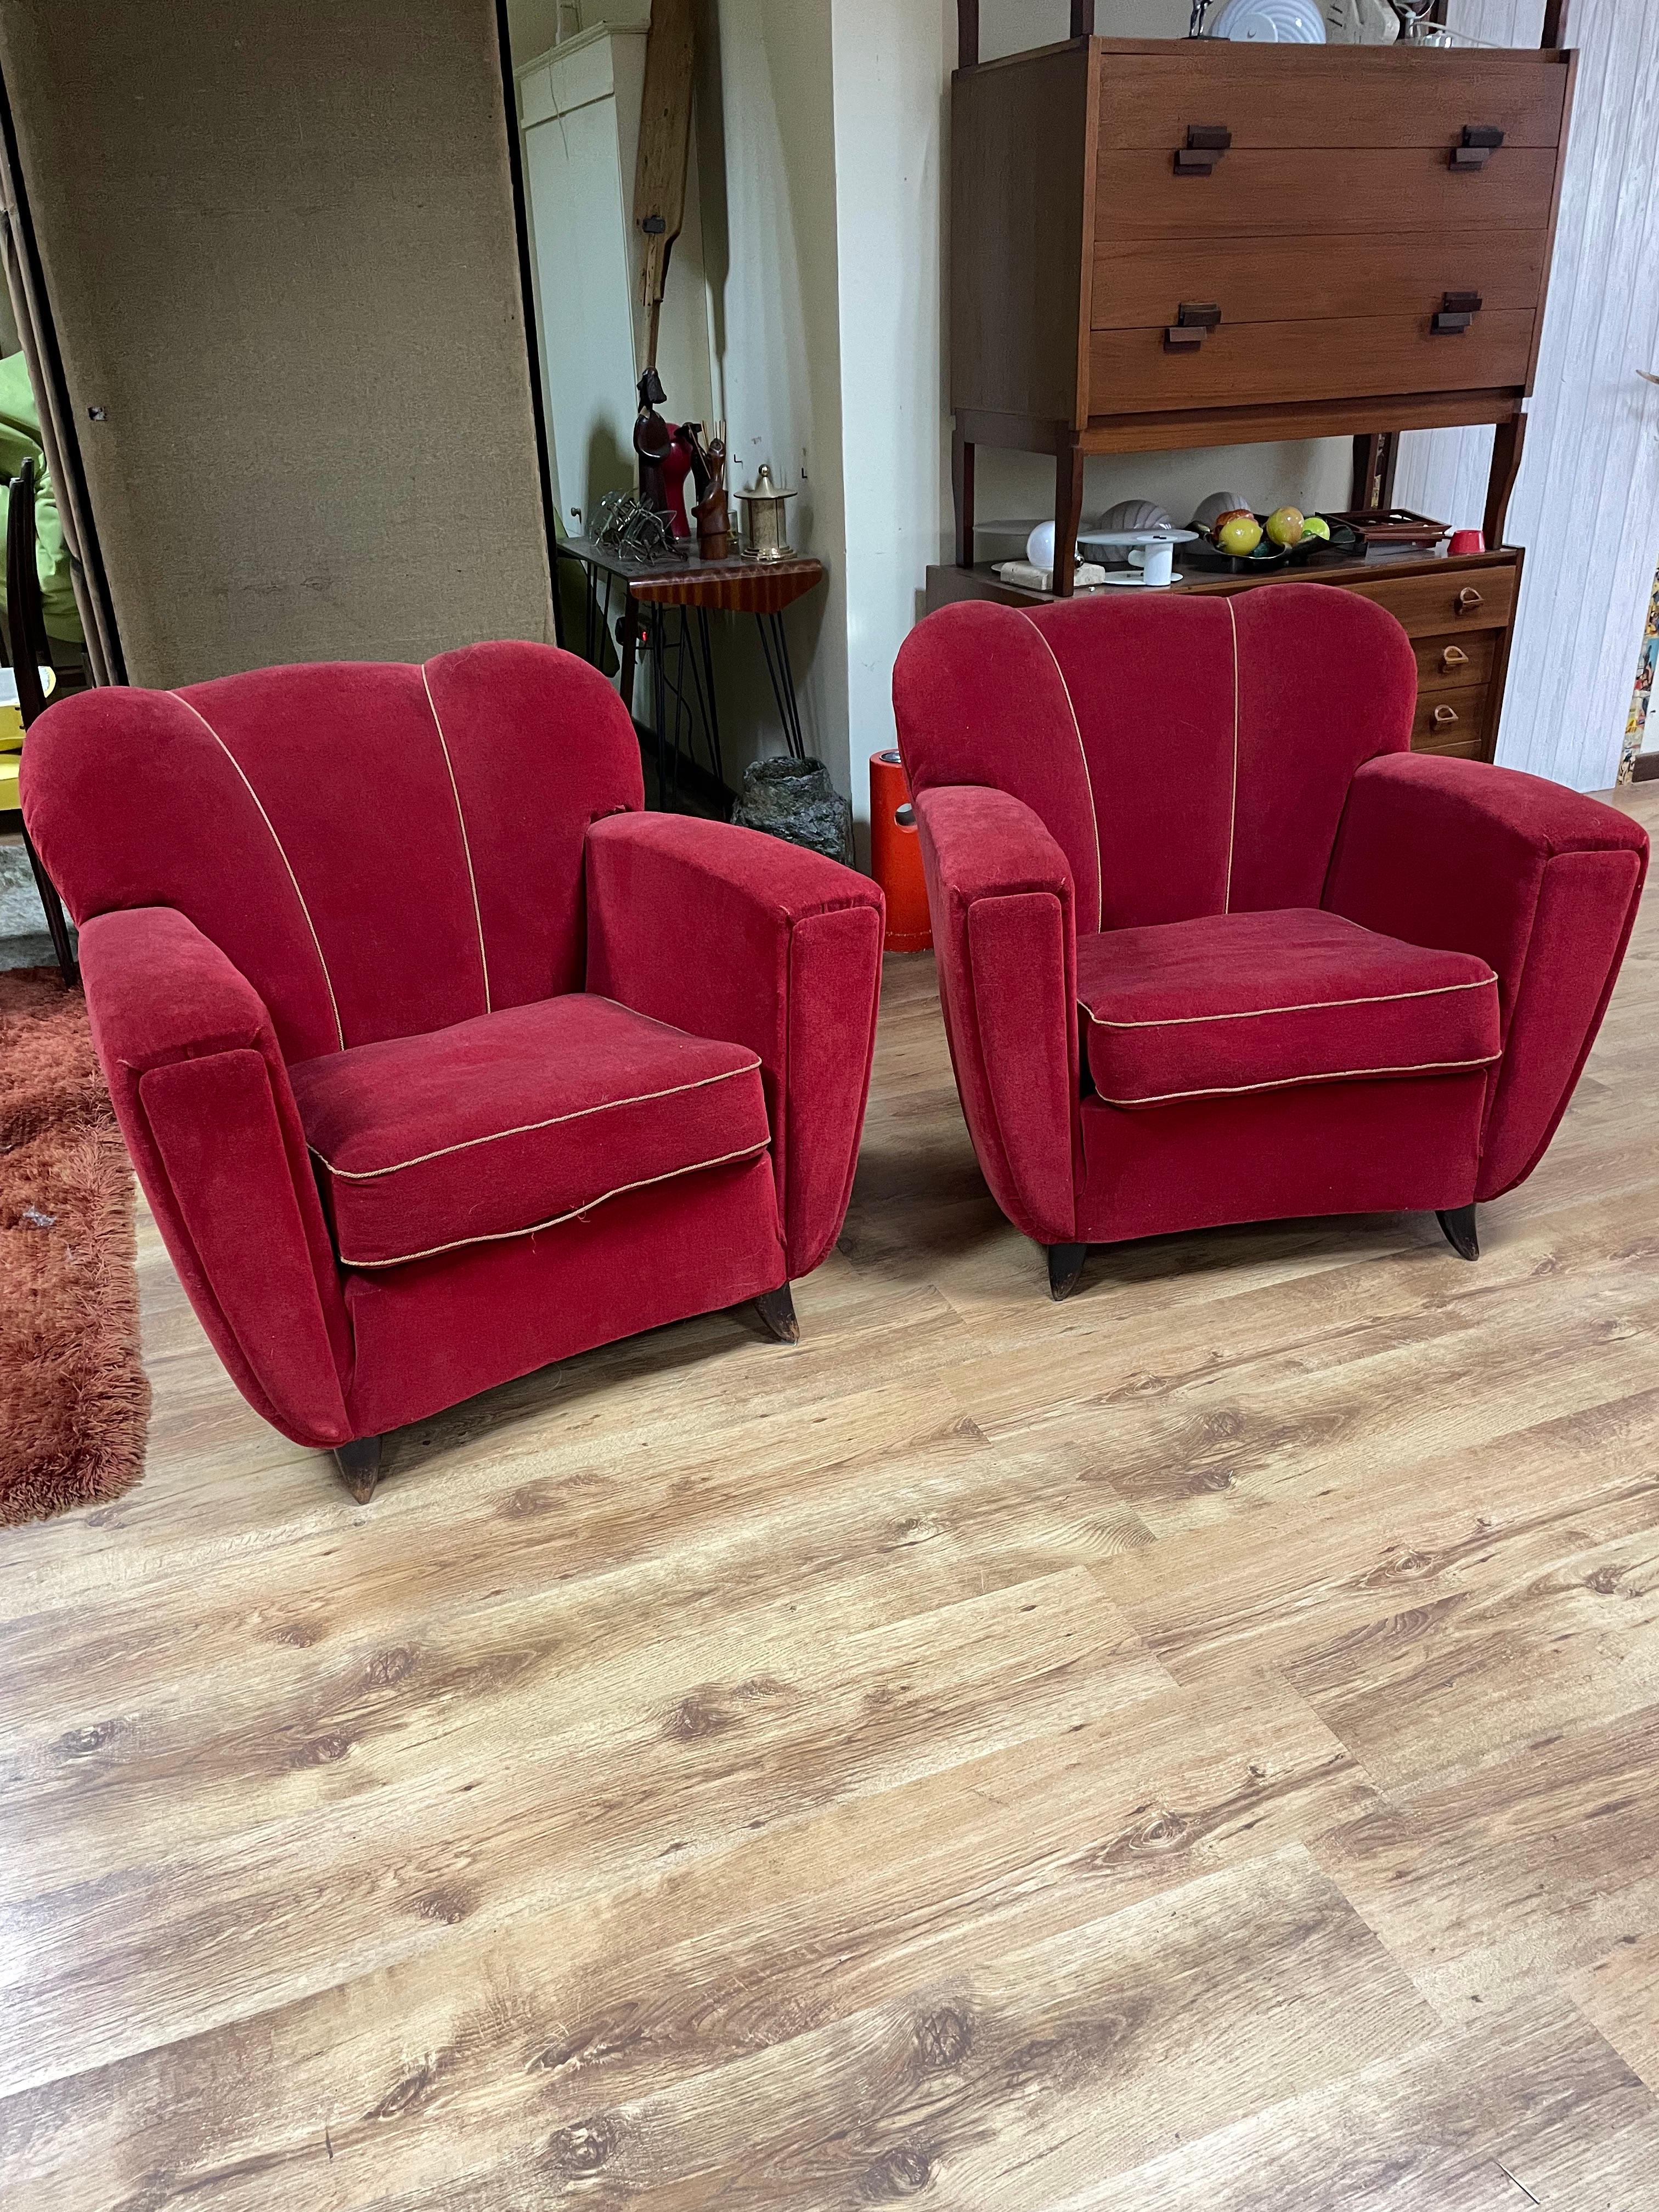 In the style of Guglielmo Ulrich an elegant pair of armchairs in original red velvet and wooden cone feet.
Italian production from the 40s.
They are in good condition although the upholstery is advisable to be redone.